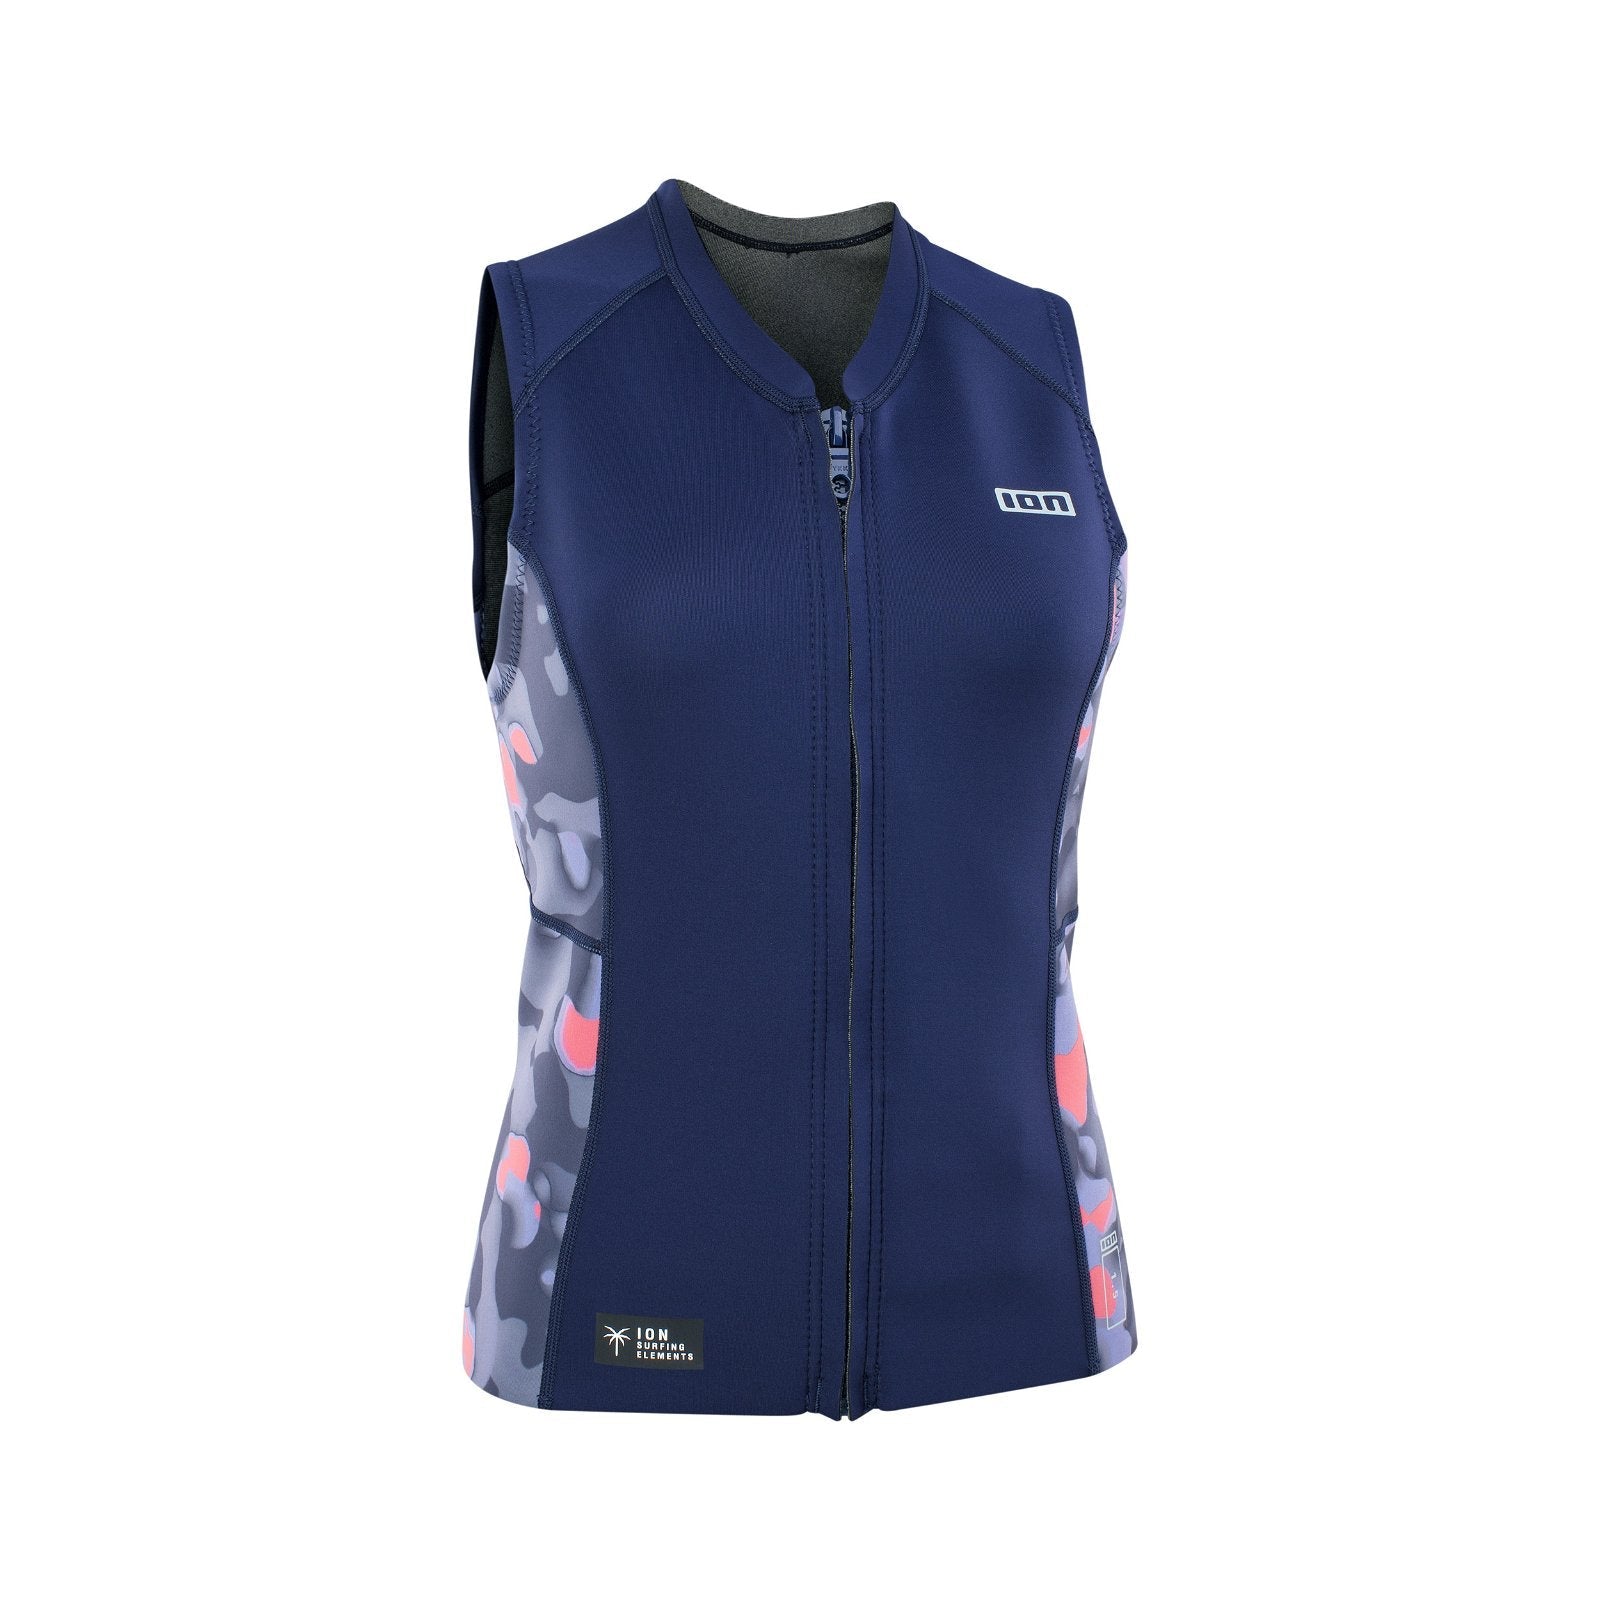 ION Neo Zip Top 1.5 SS 2022-ION Water-L-Fuchsia-48223-4228-9010583059280-Surf-store.com